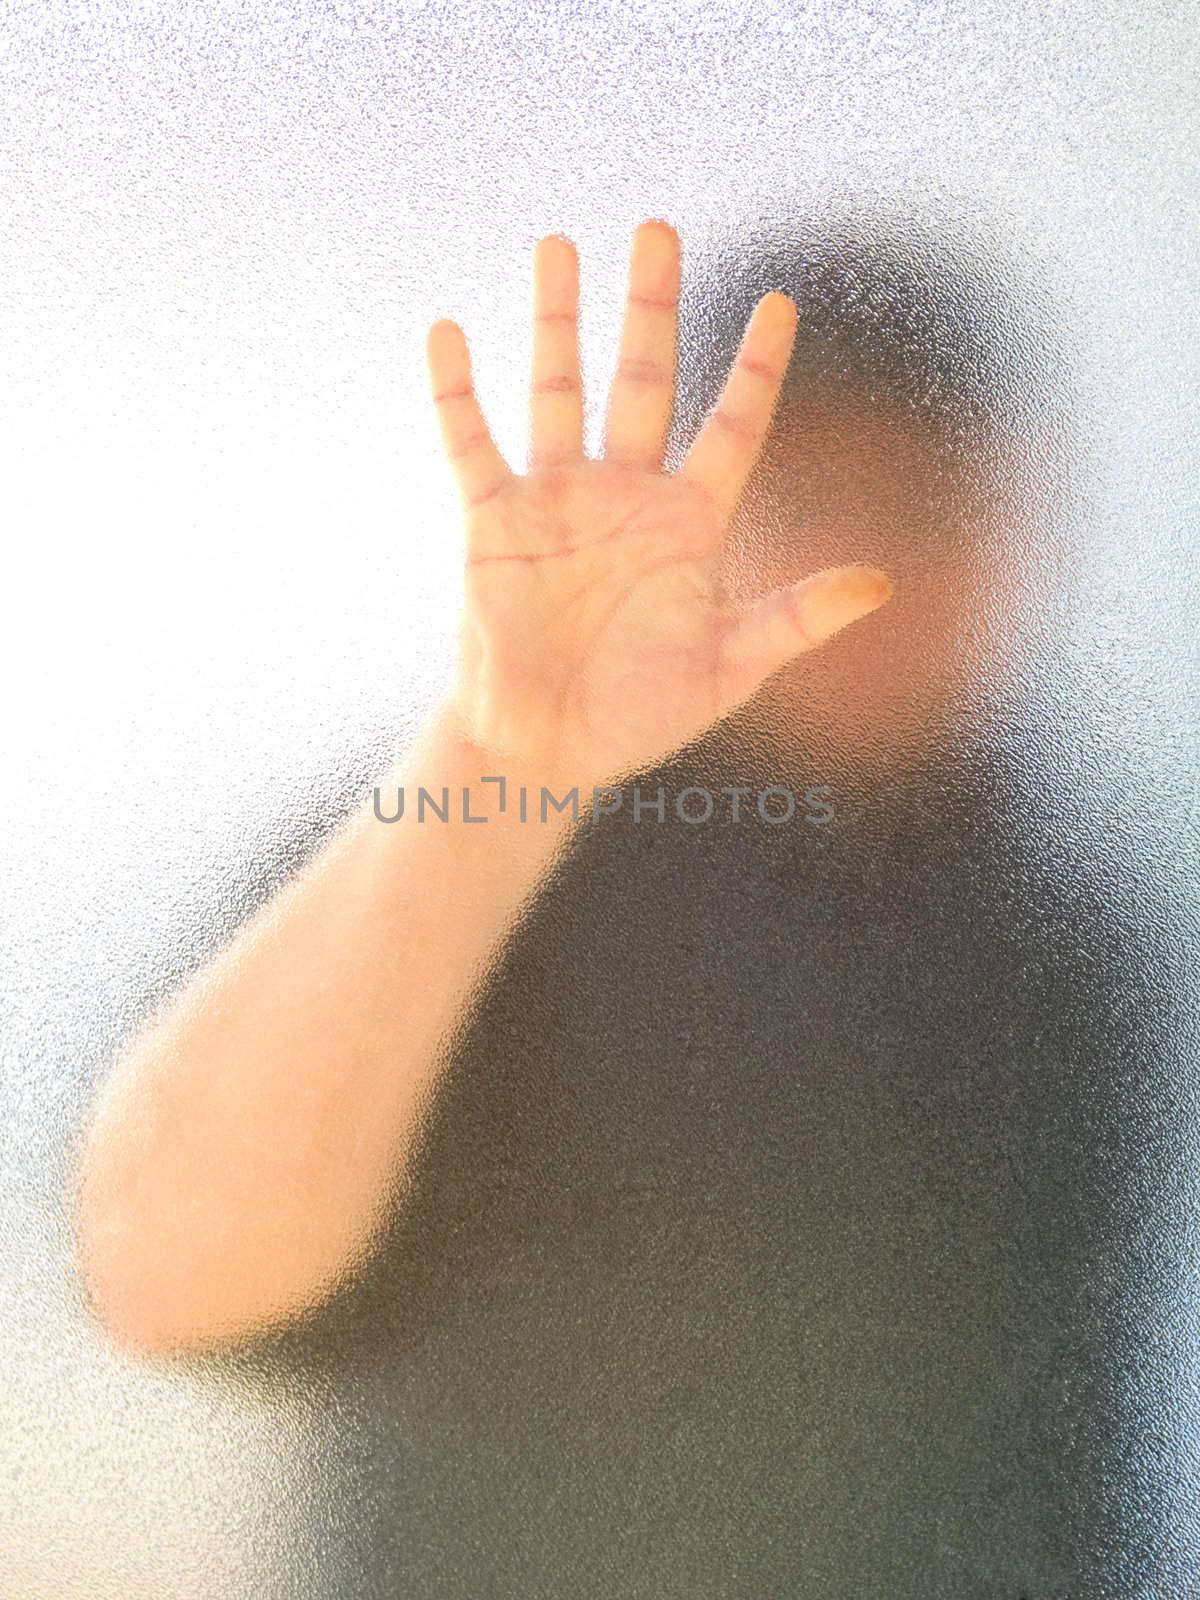 Silhouette of a man's body through frosted glass  by motorolka